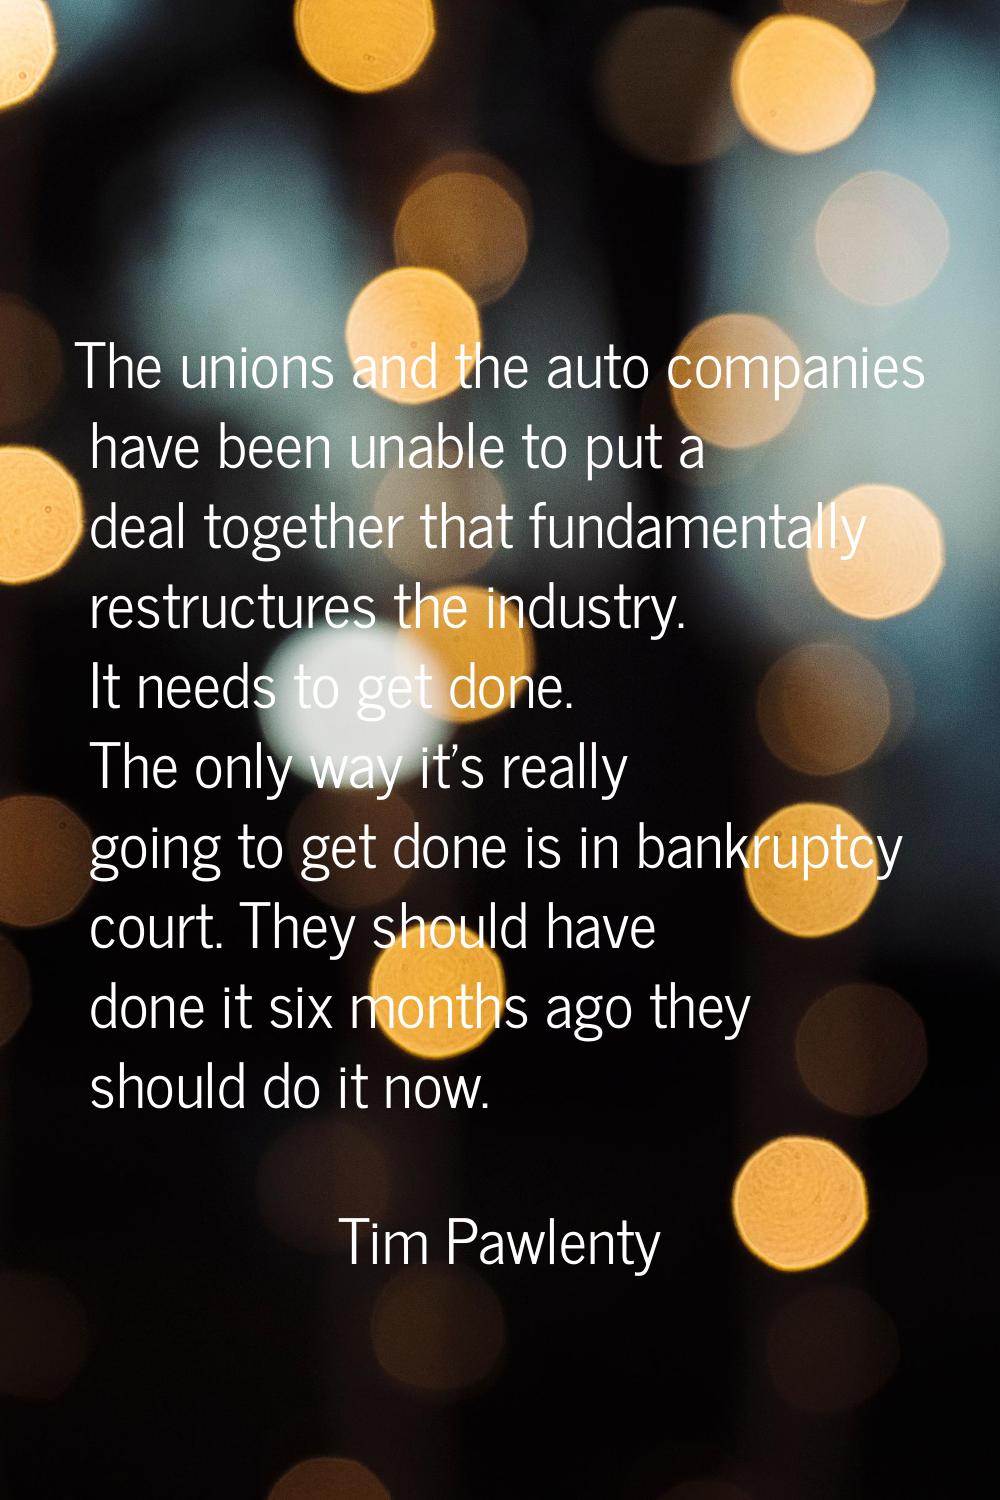 The unions and the auto companies have been unable to put a deal together that fundamentally restru